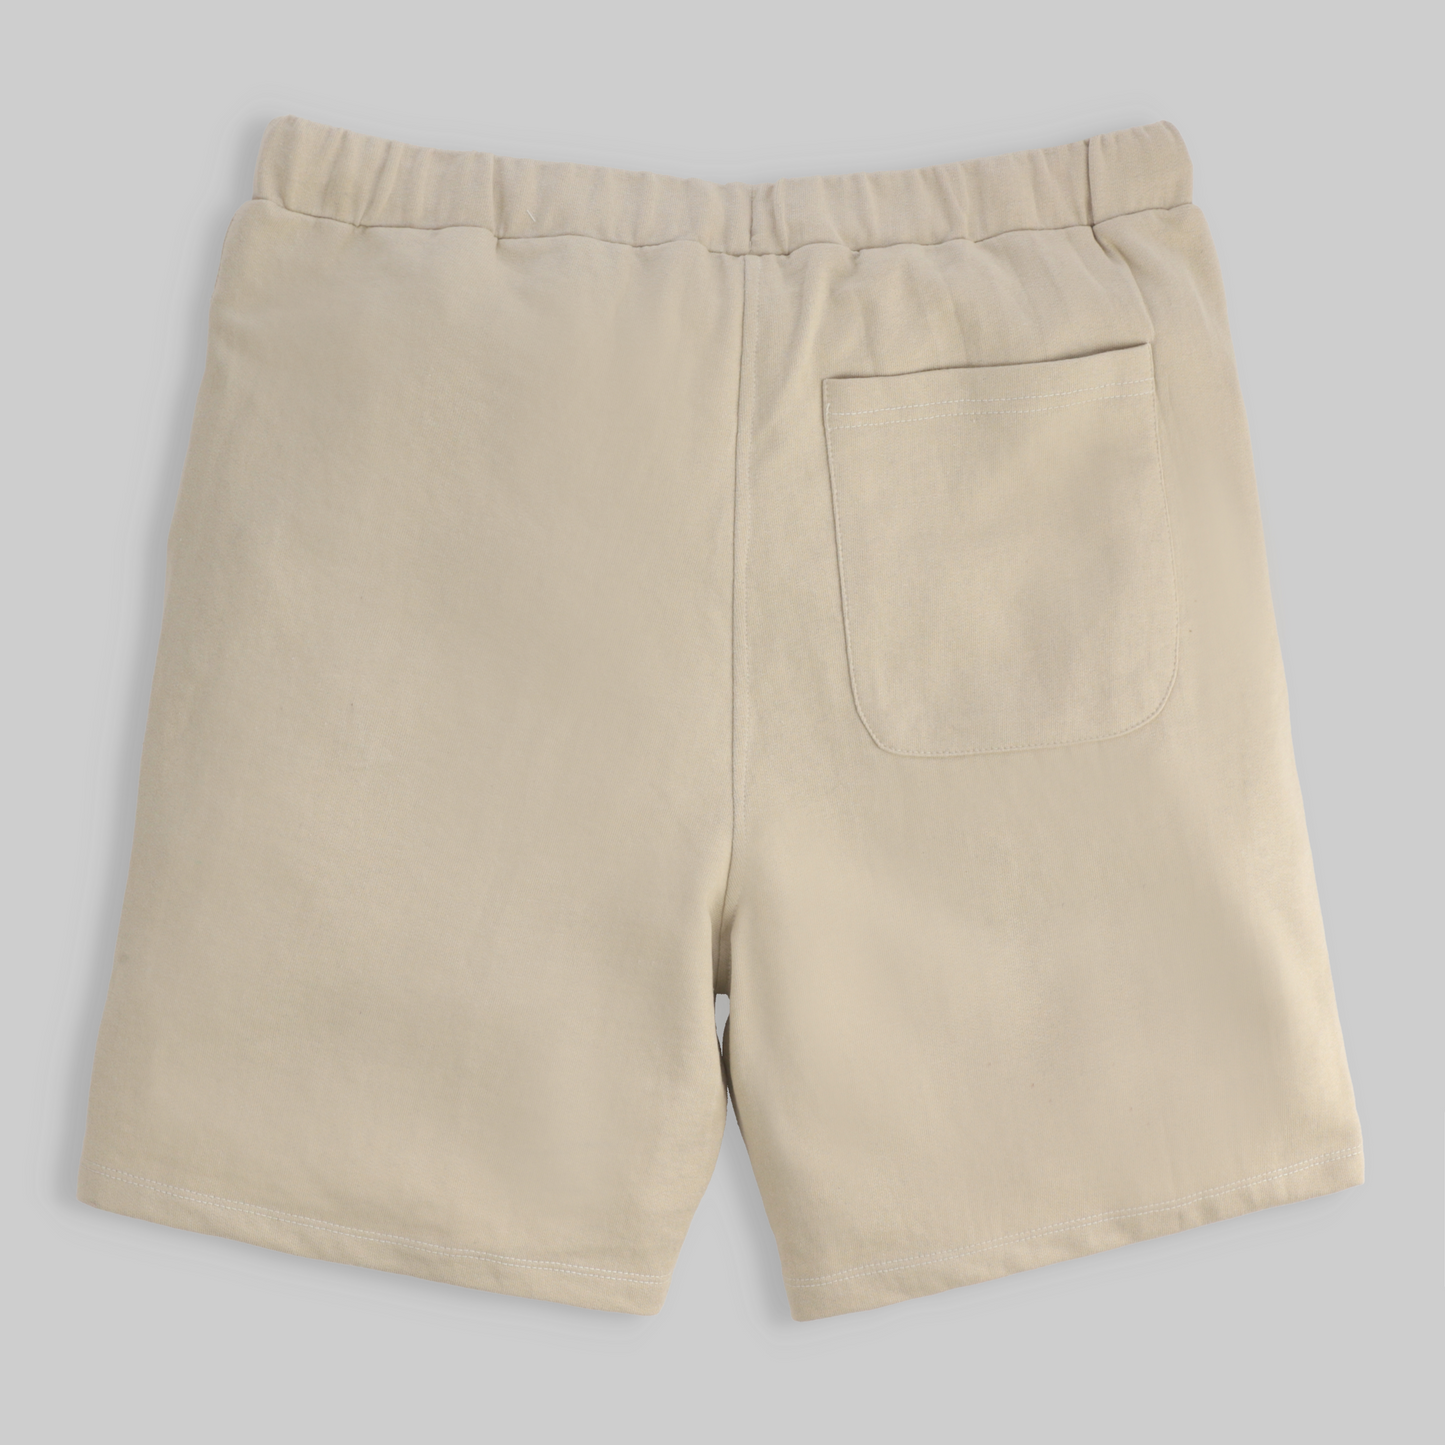 Embroidered Polarbear Shorts - Oat Meal